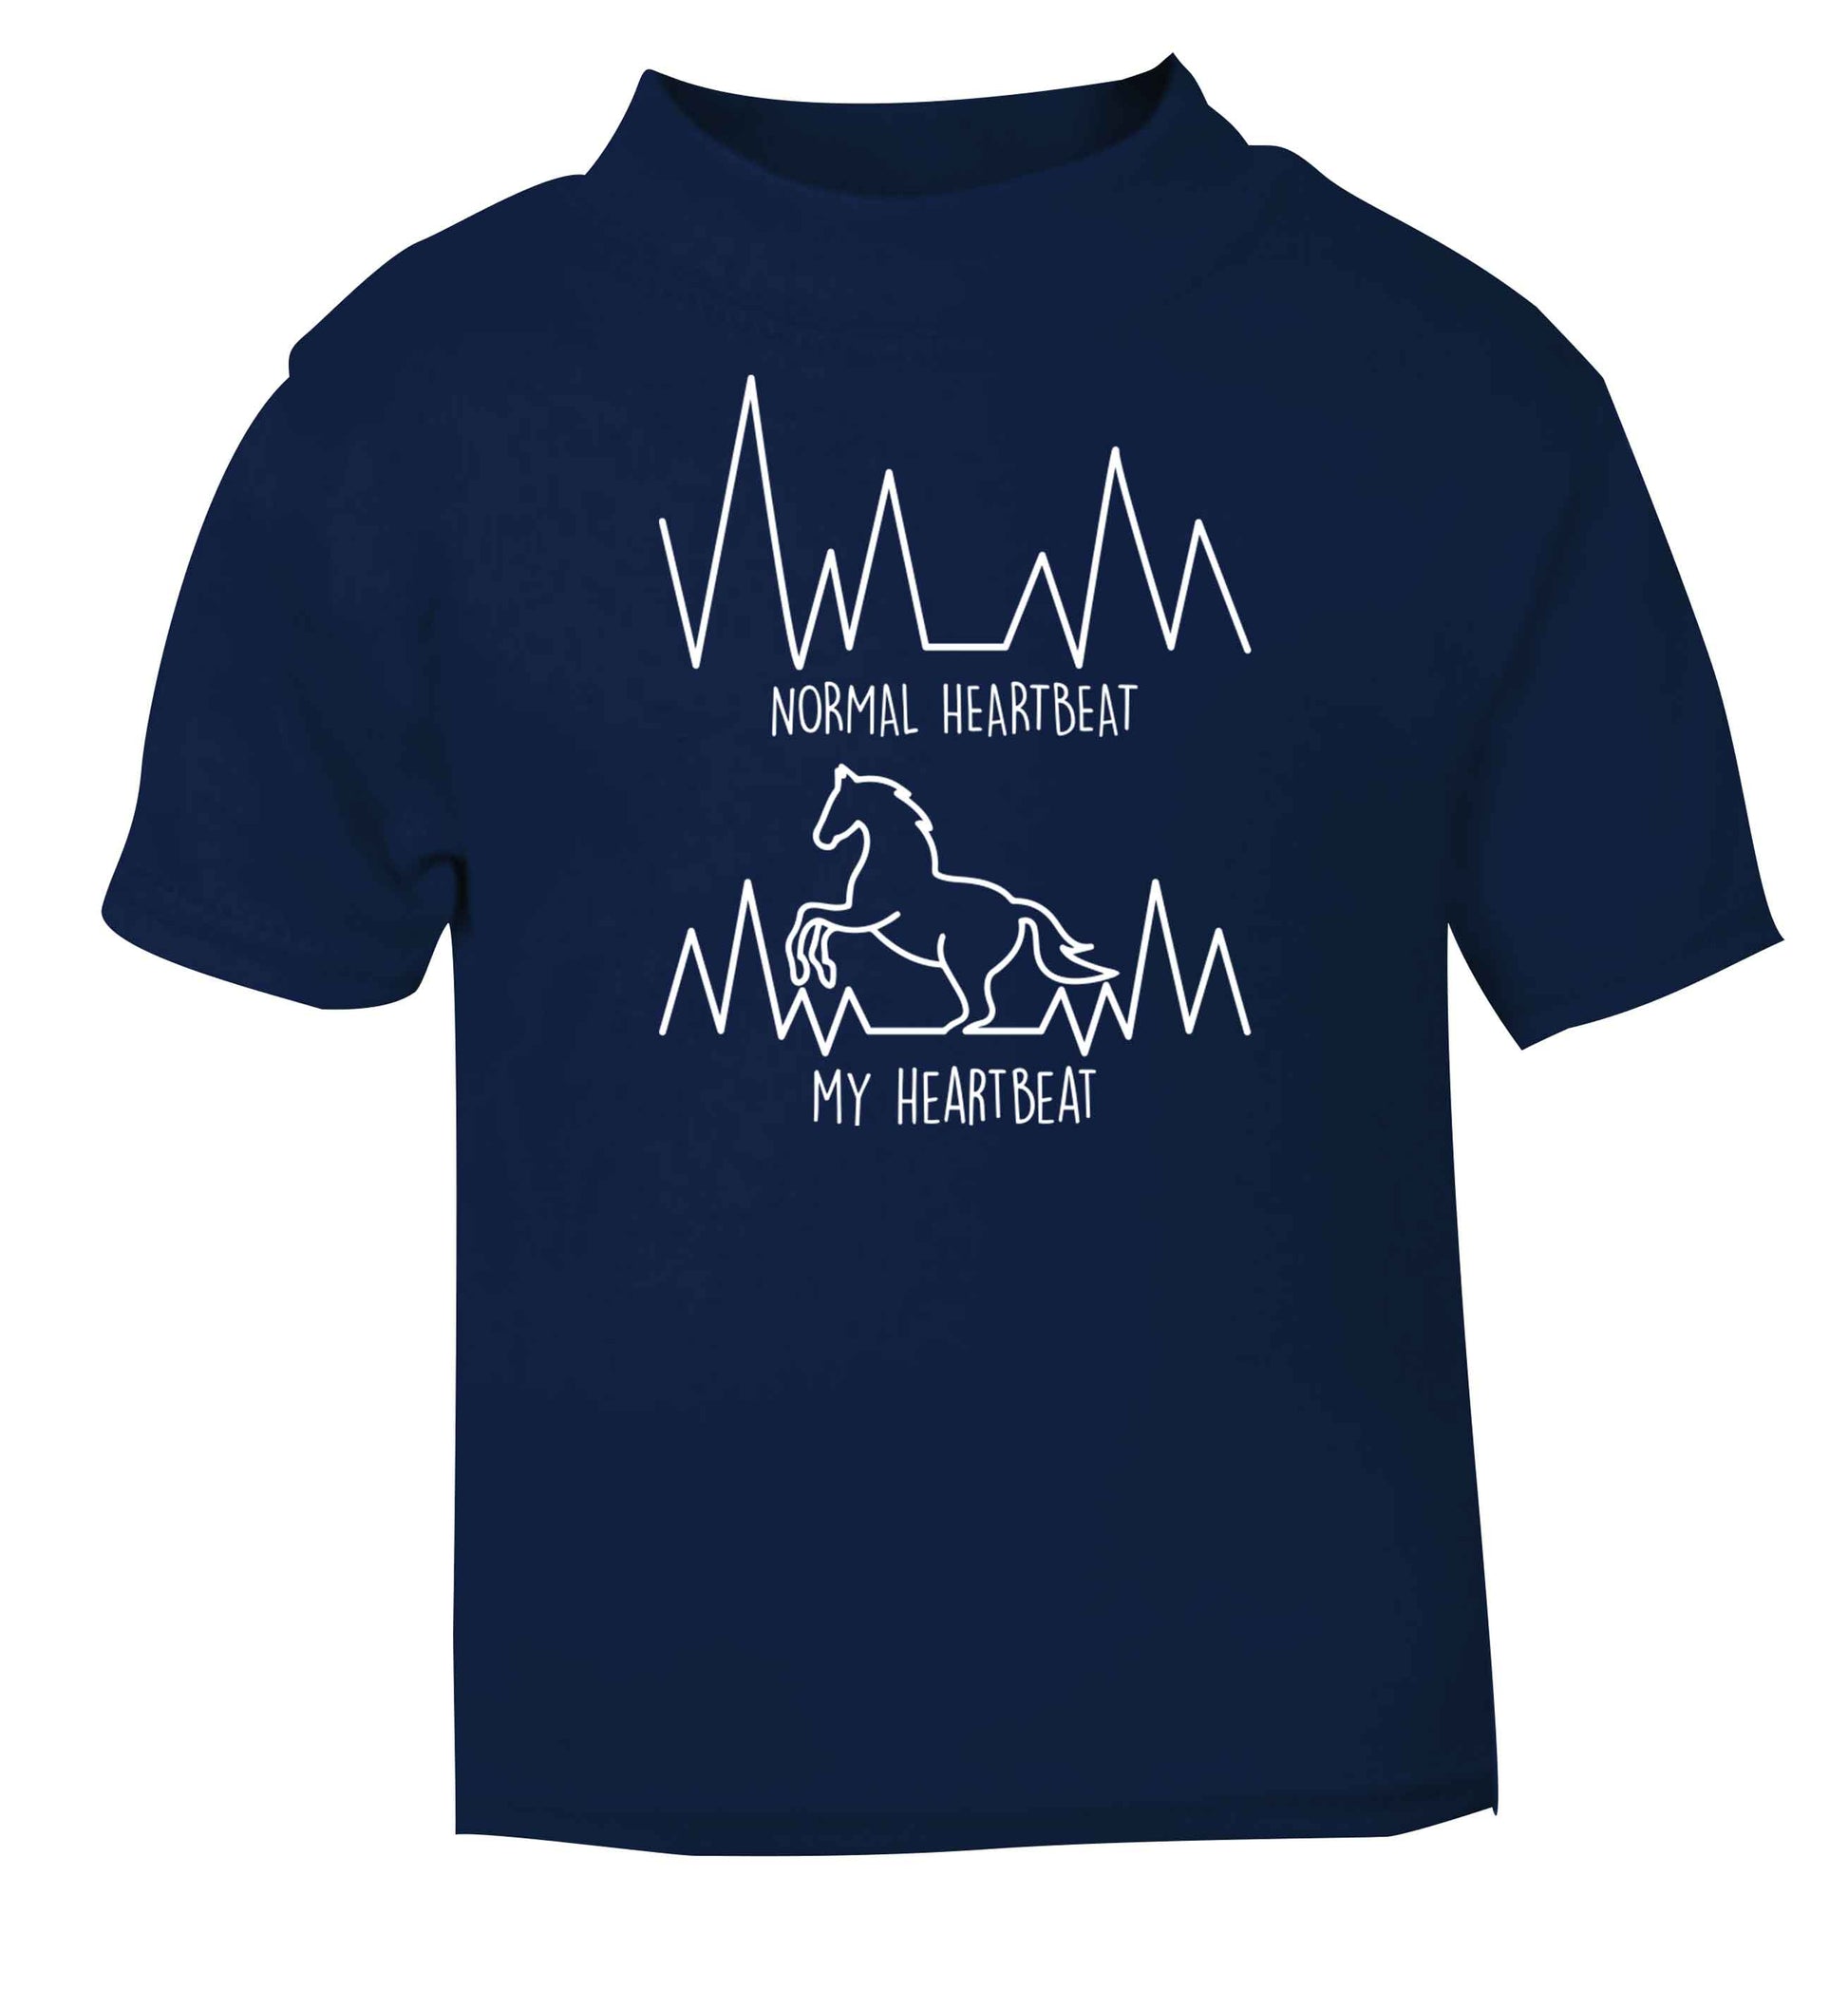 Horse - Normal heartbeat my heartbeat navy baby toddler Tshirt 2 Years